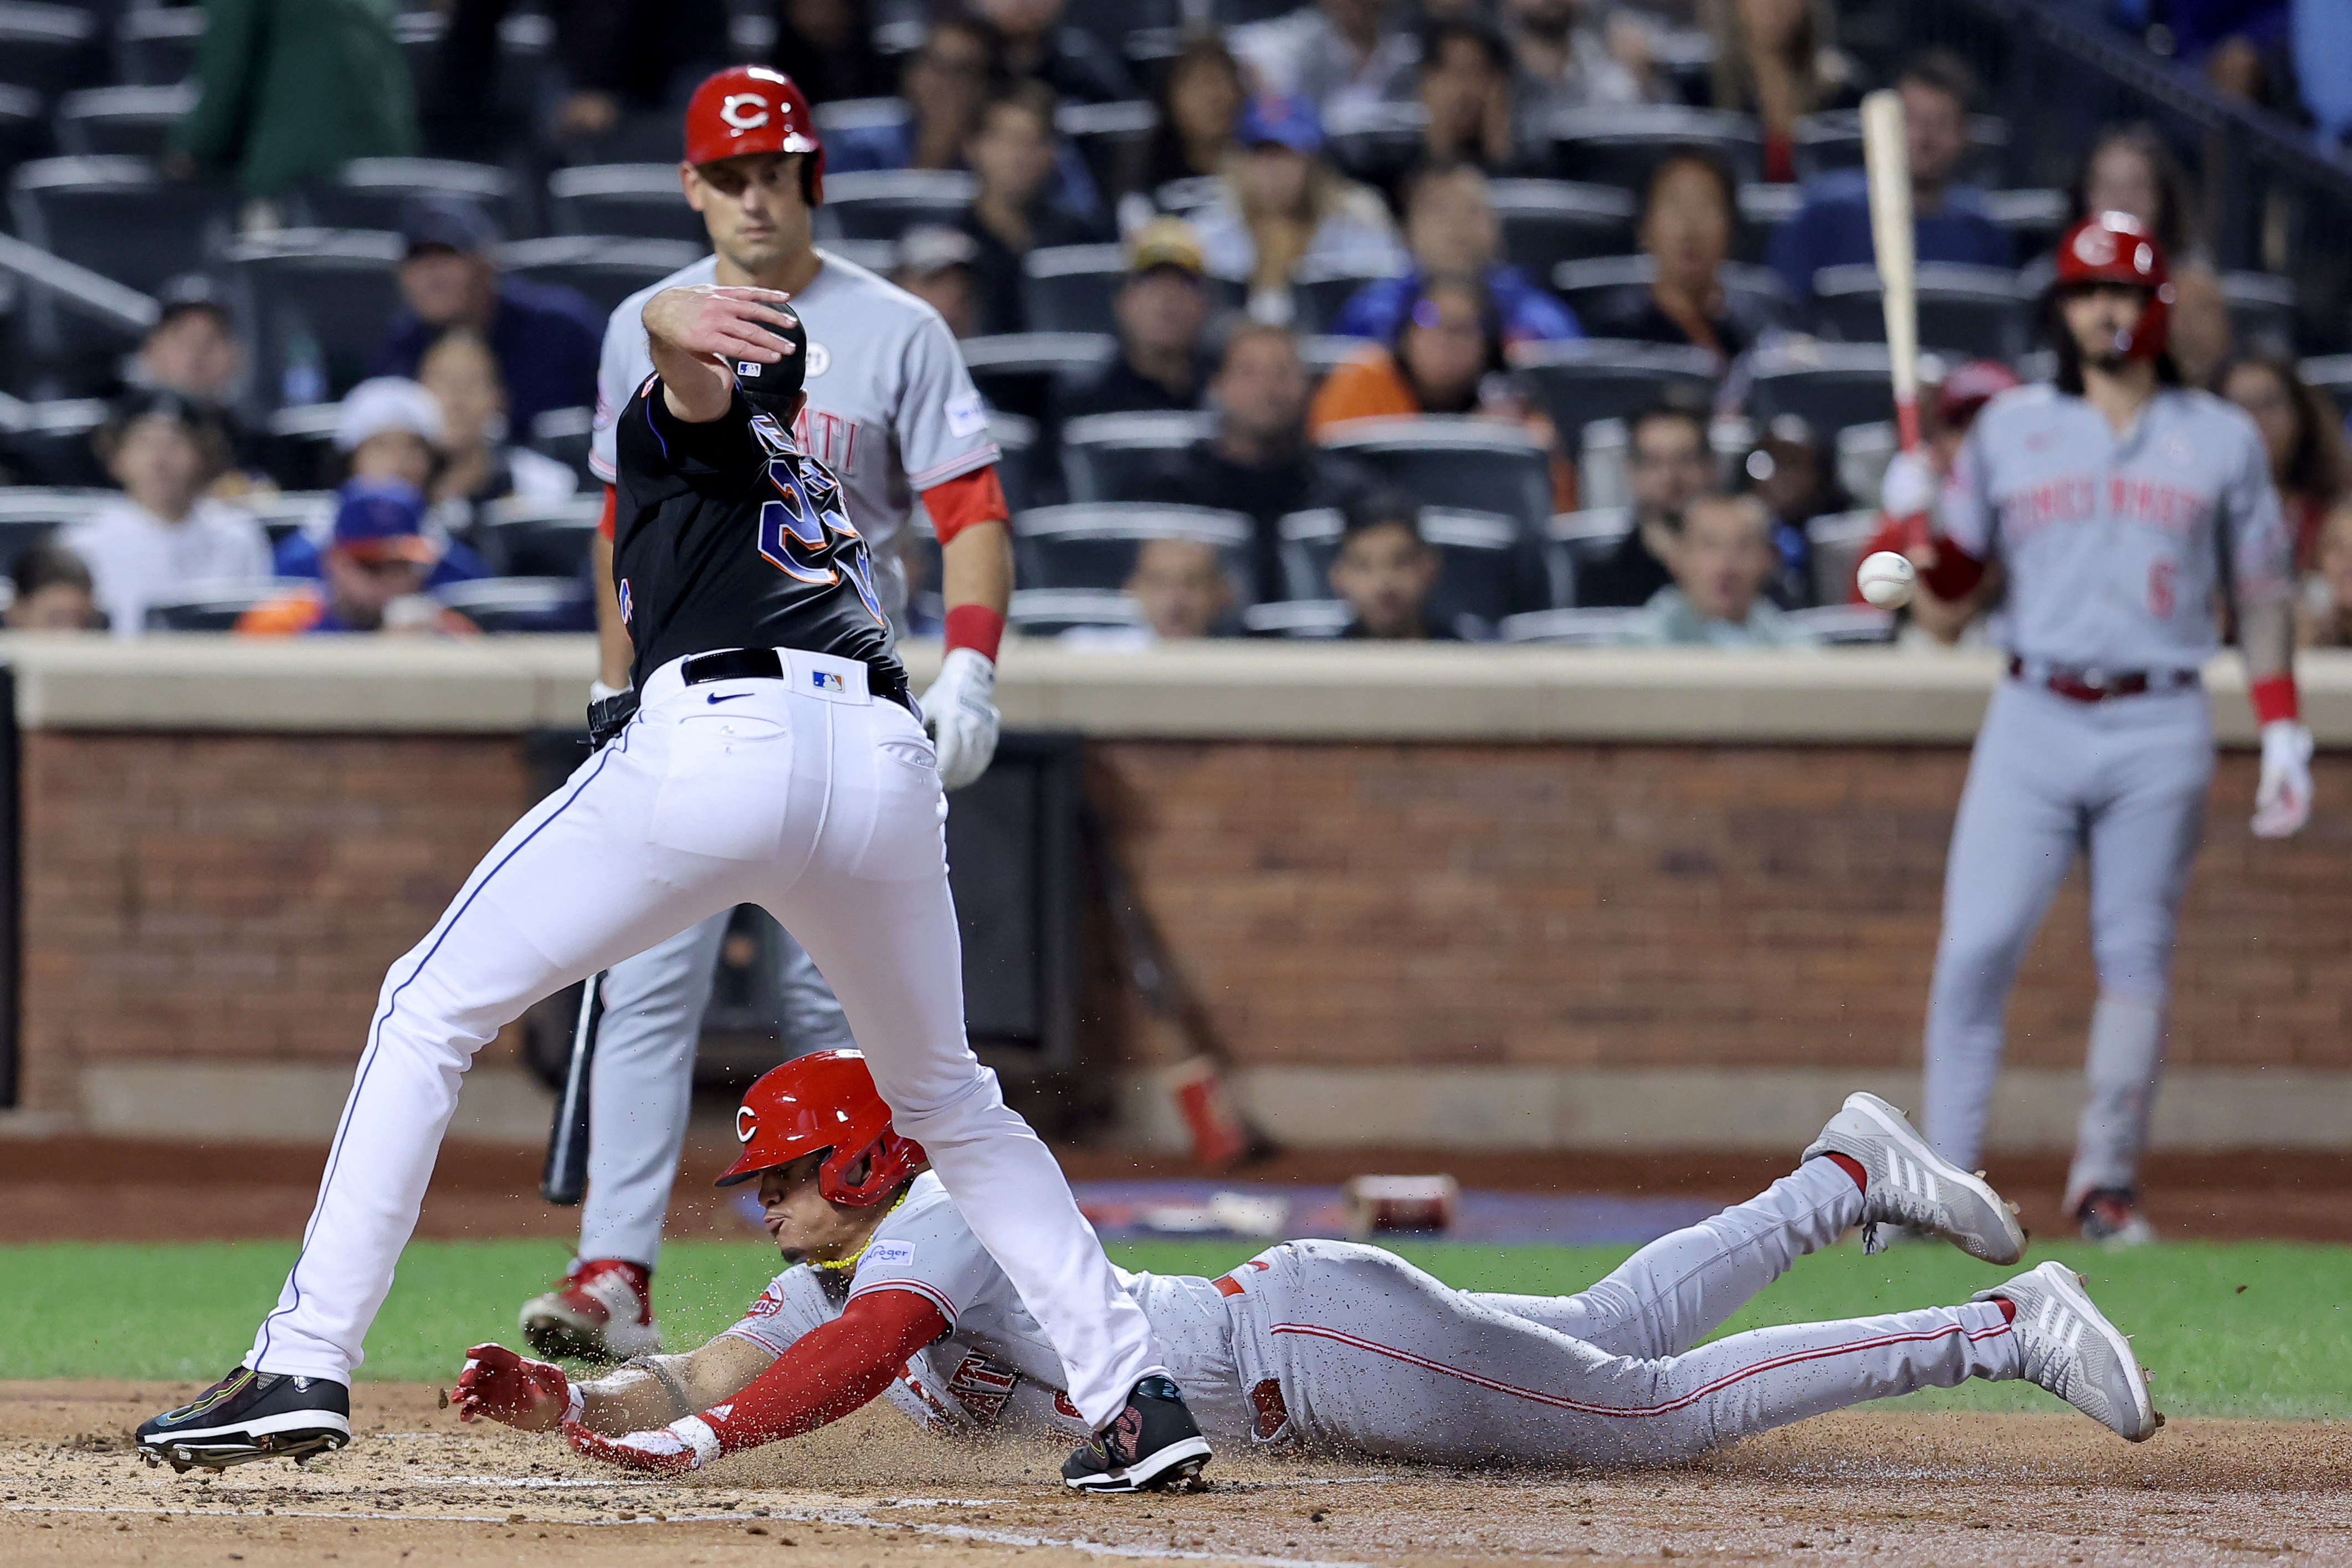 Jonathan India CLUTCH HR helps Cincinnati Reds get big win at NY Mets, Chatterbox Reds